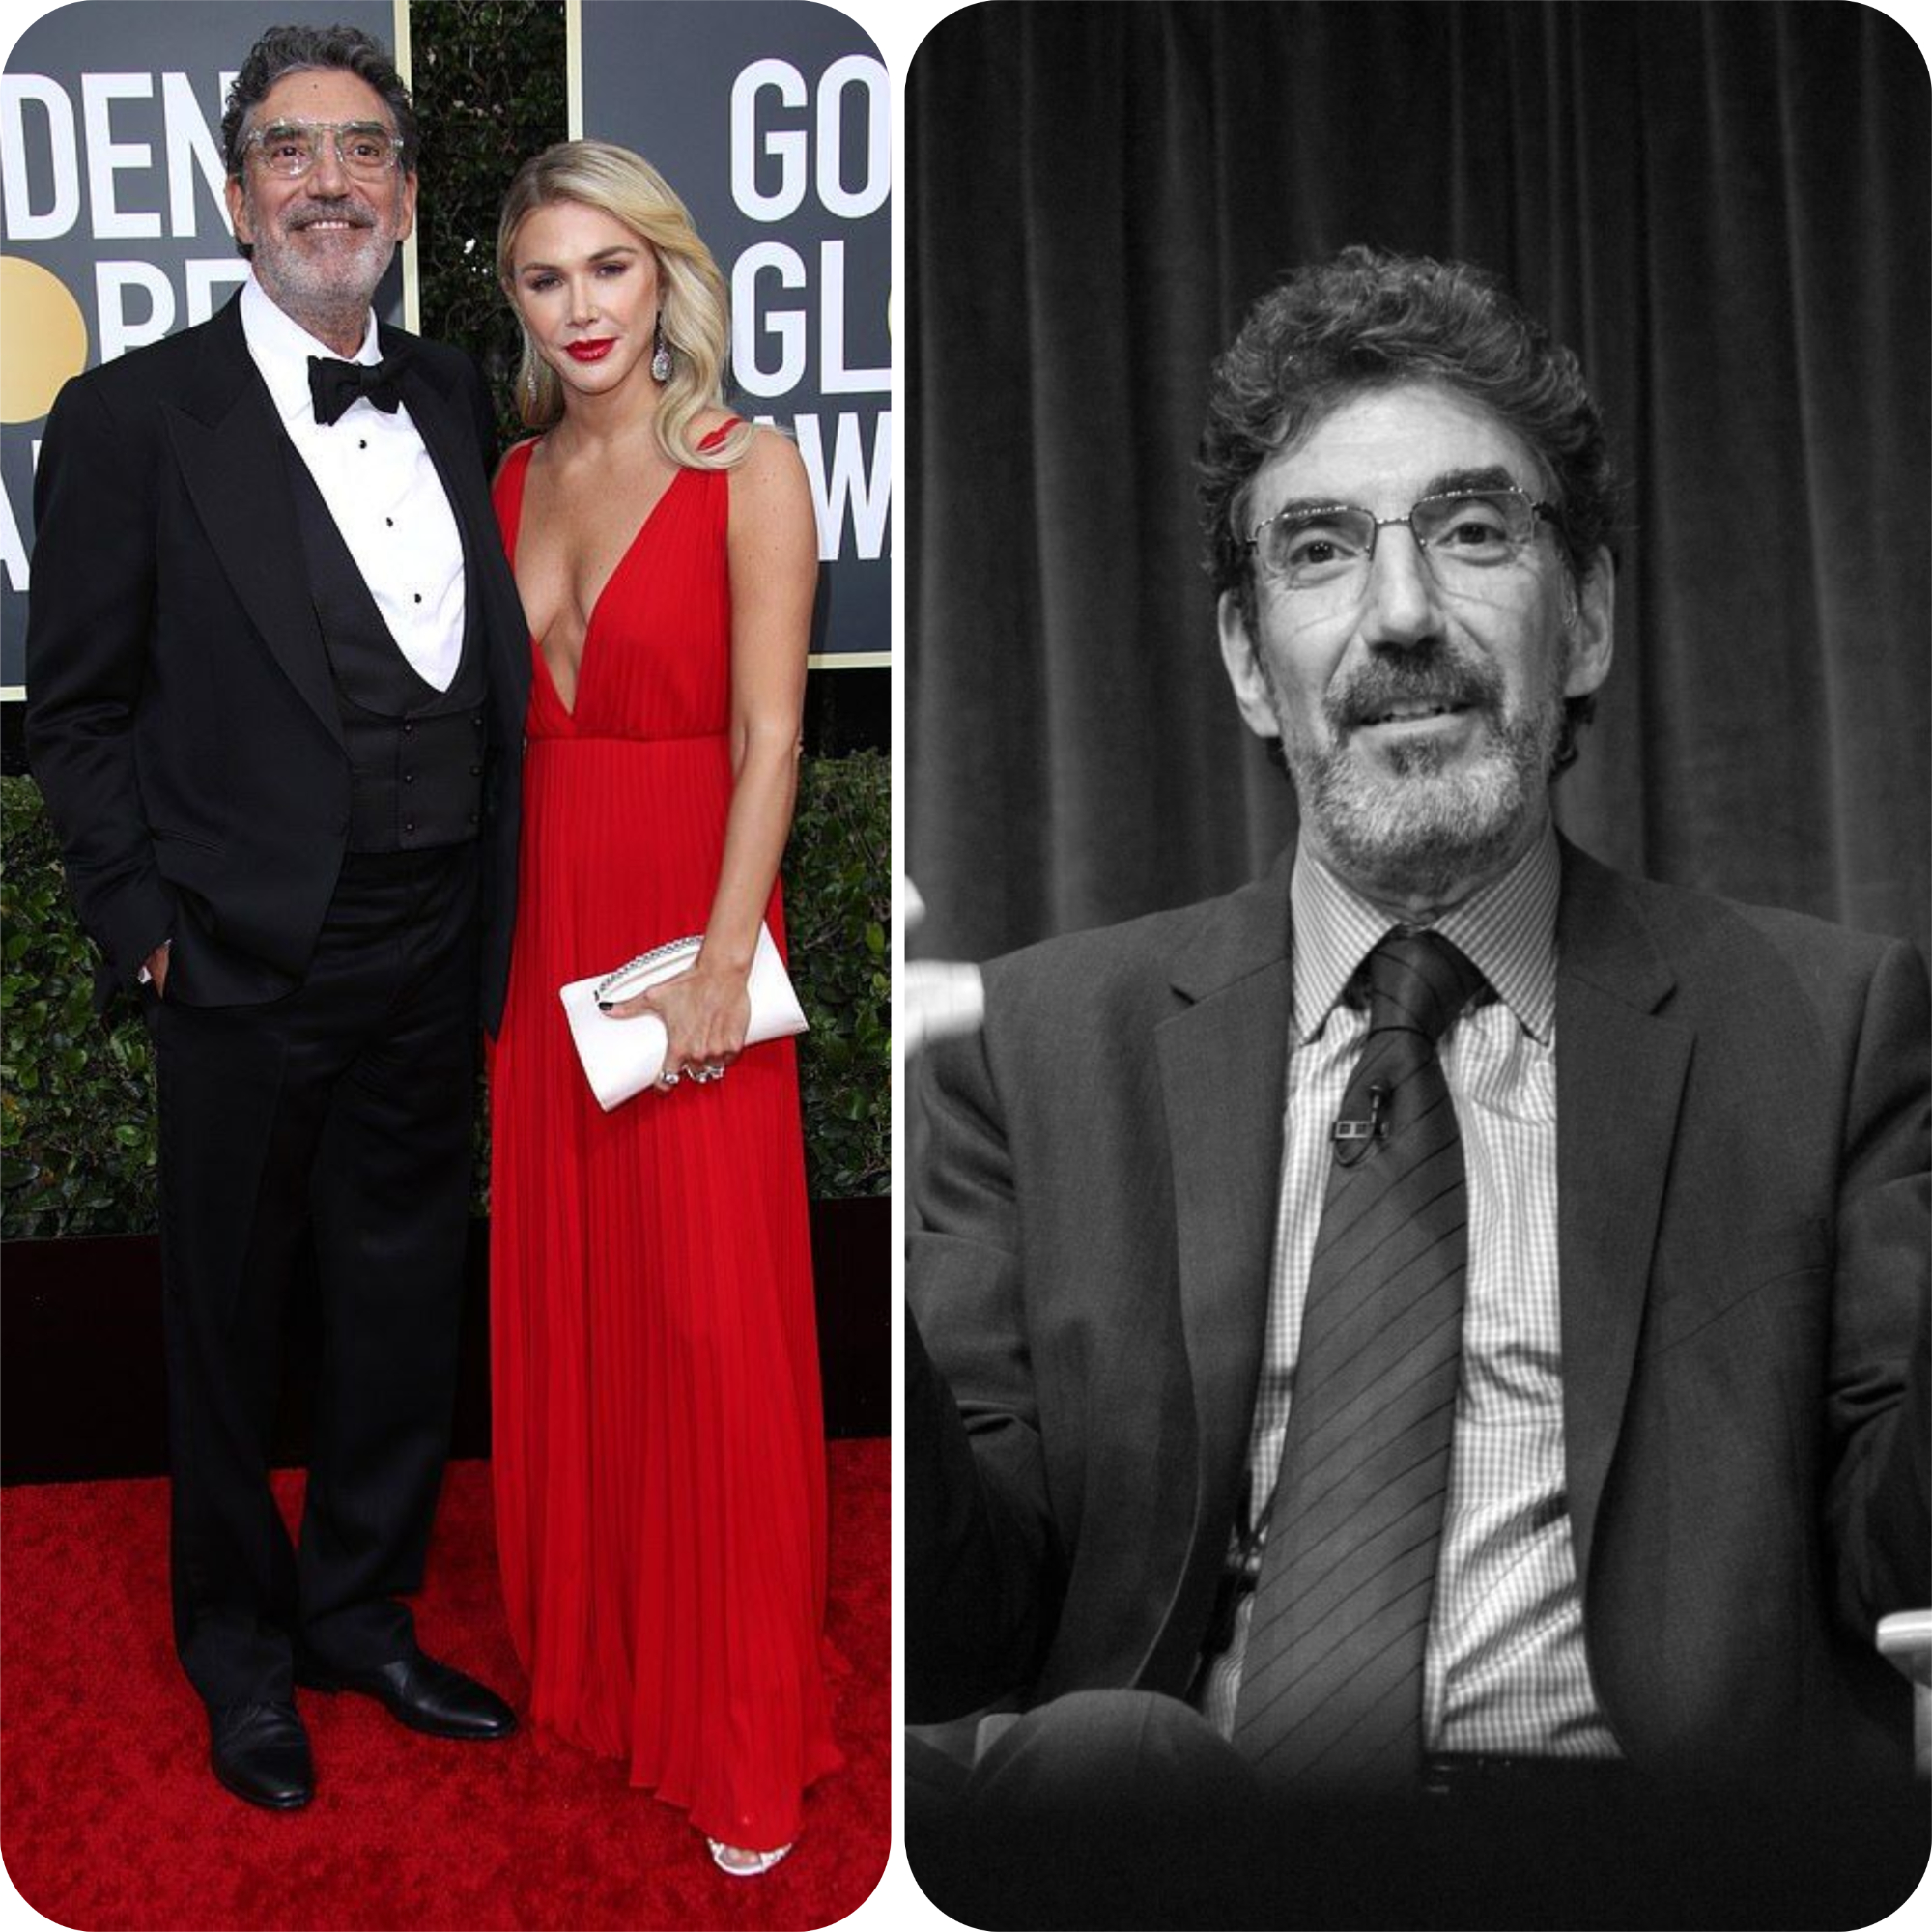 Chuck Lorre, the "King of Sitcoms" himself, is one step closer to finalizing his third divorce after reaching a settlement with his ex-wife, Arielle Lorre